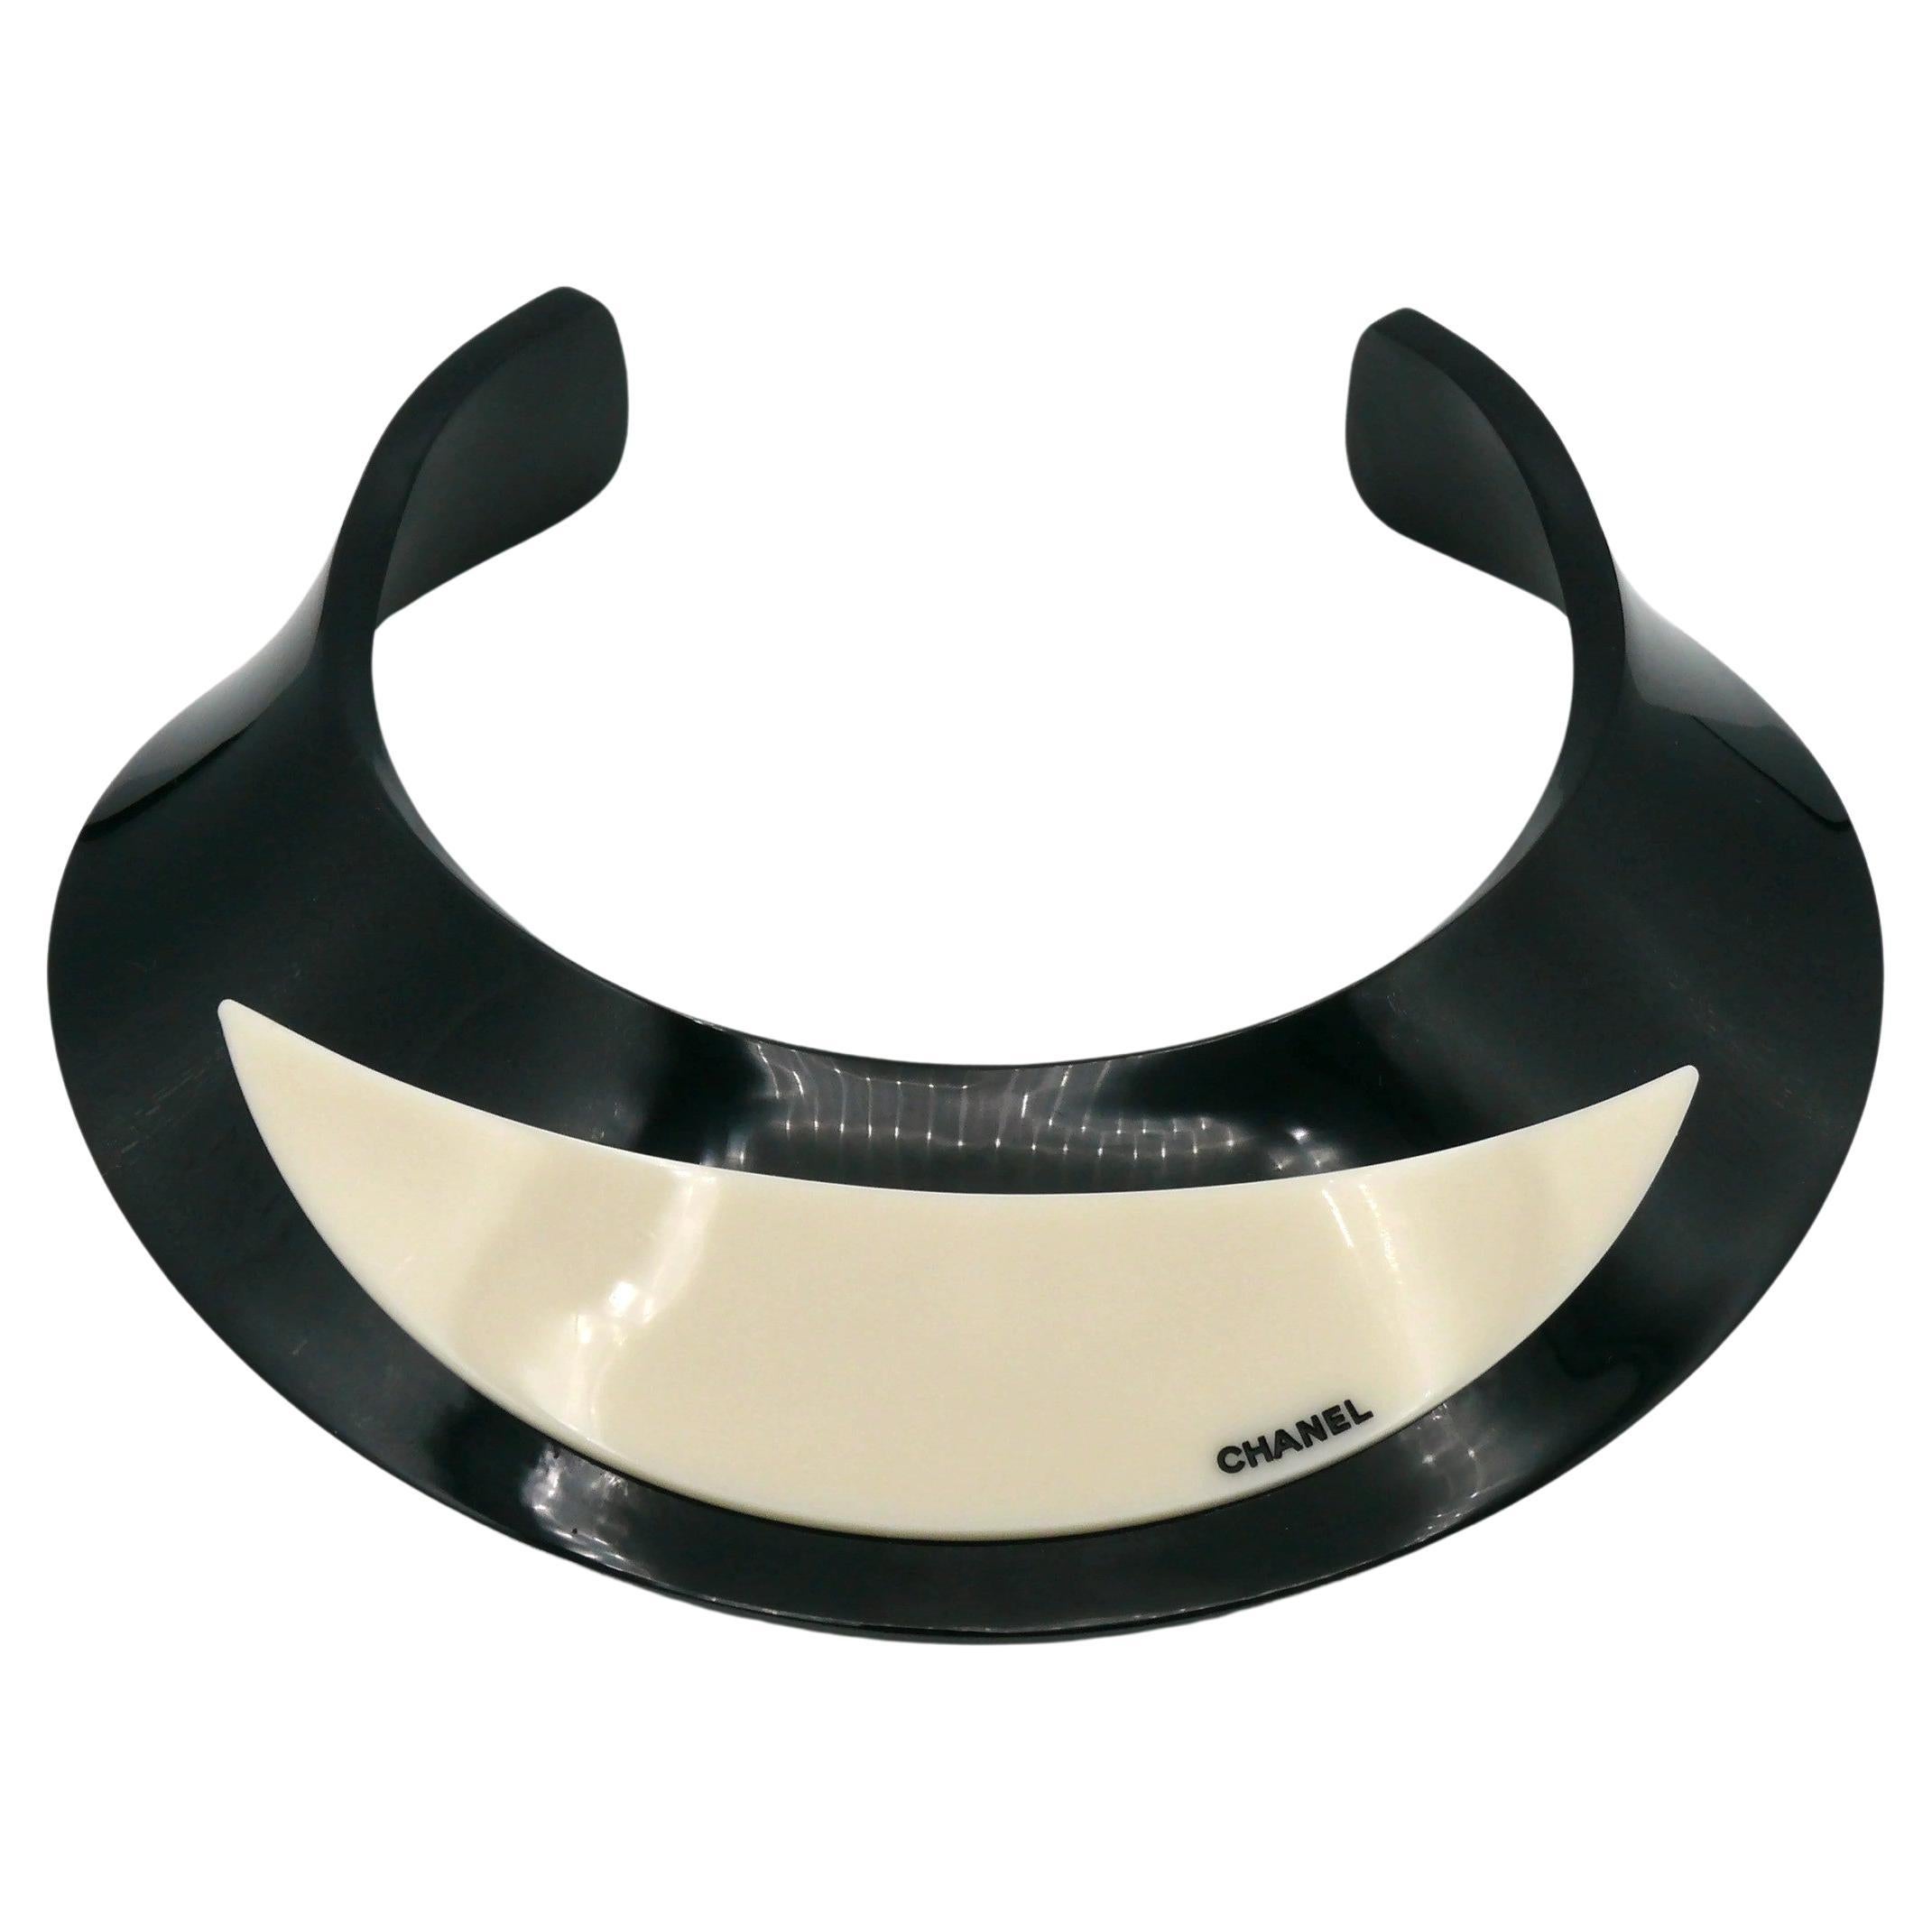 CHANEL by KARL LAGERFELD Black and White Resin Choker Necklace, Fall 2007 For Sale